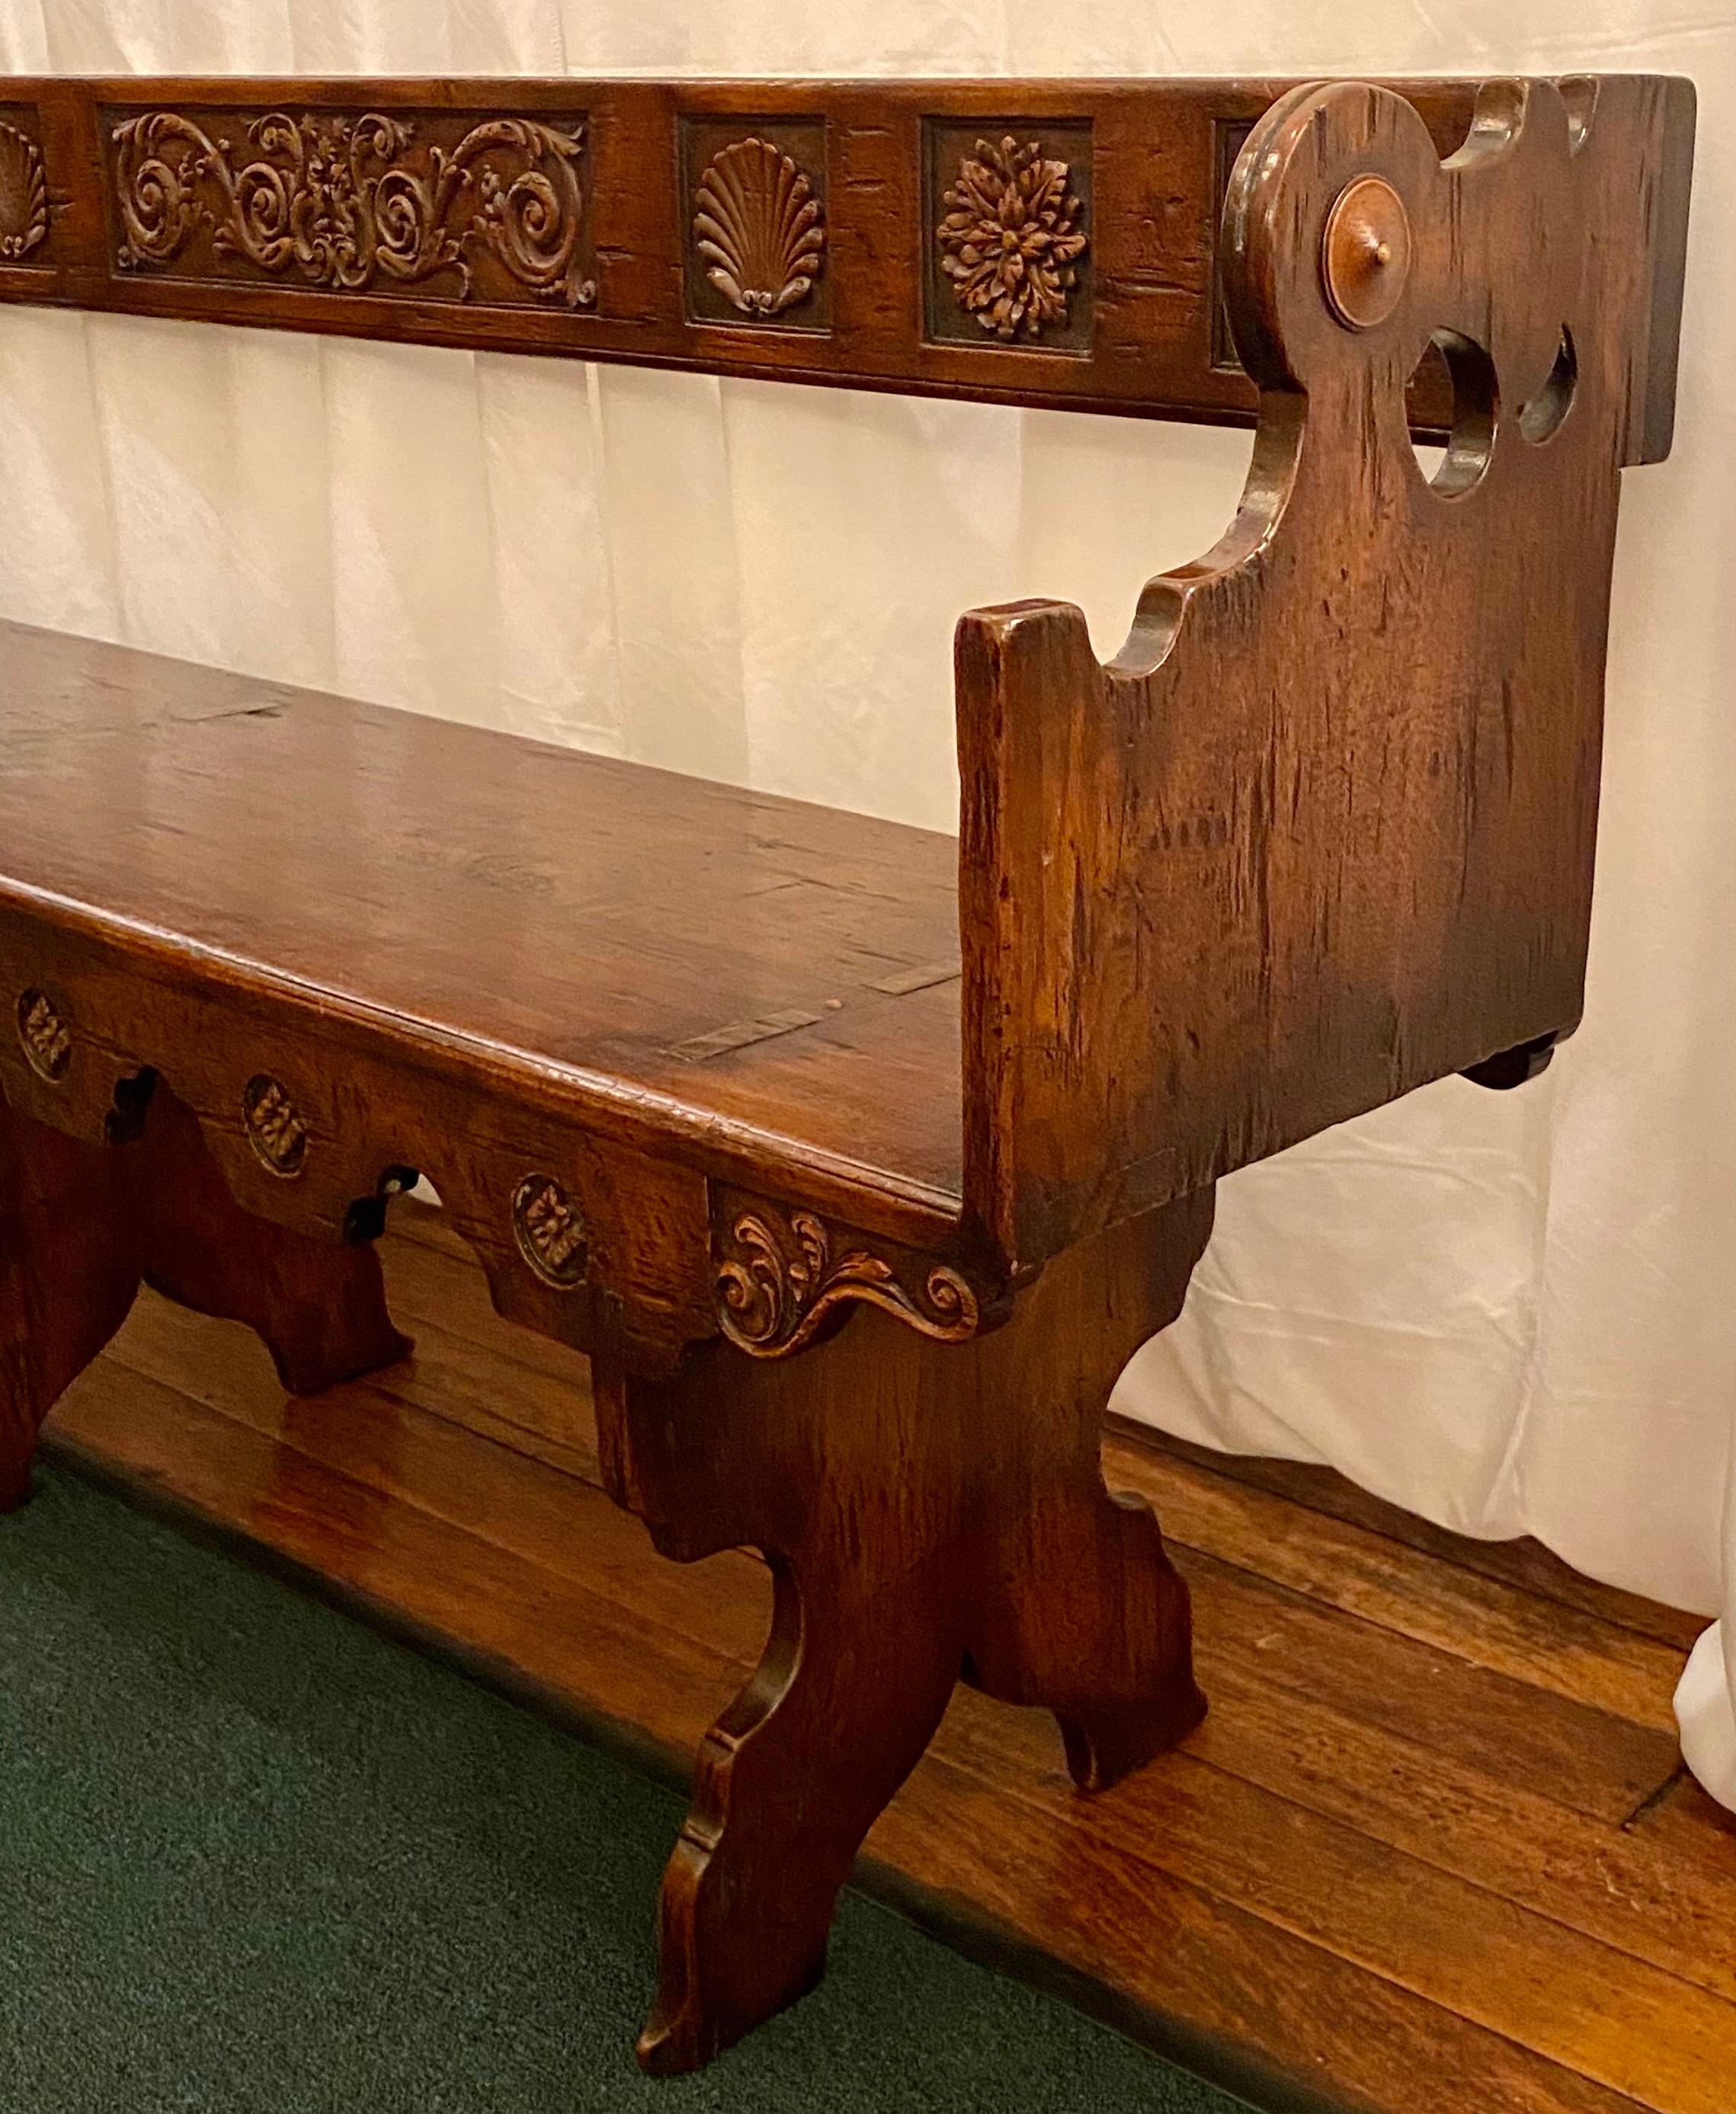 Antique 19th Century French Carved Walnut Banquette Bench, circa 1880 For Sale 1